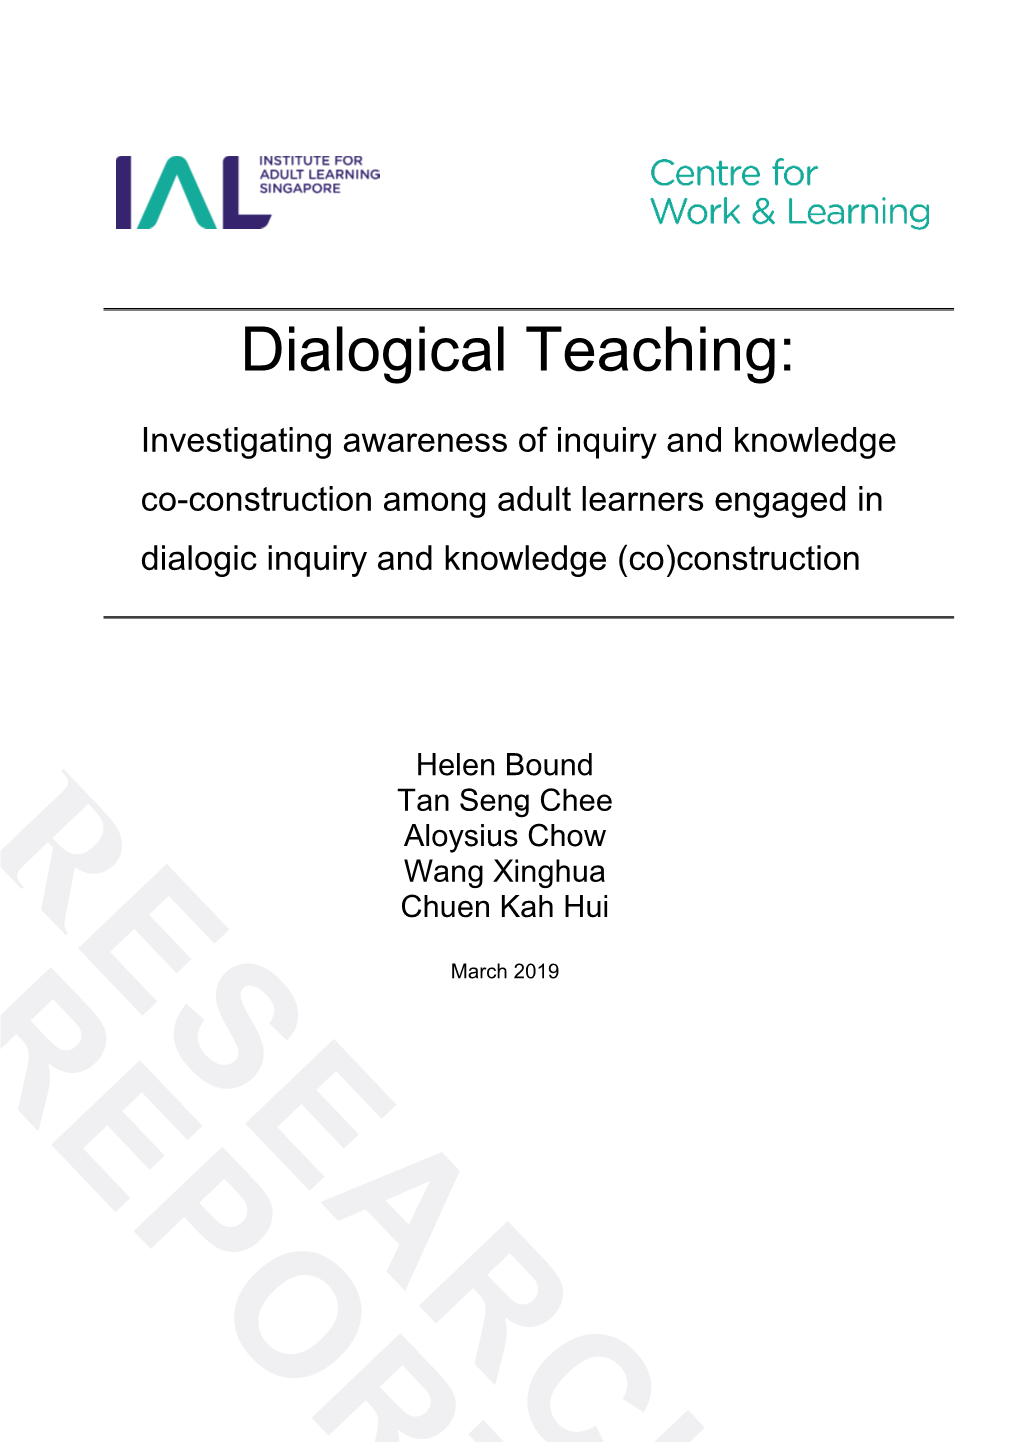 Dialogical Teaching Learning Report